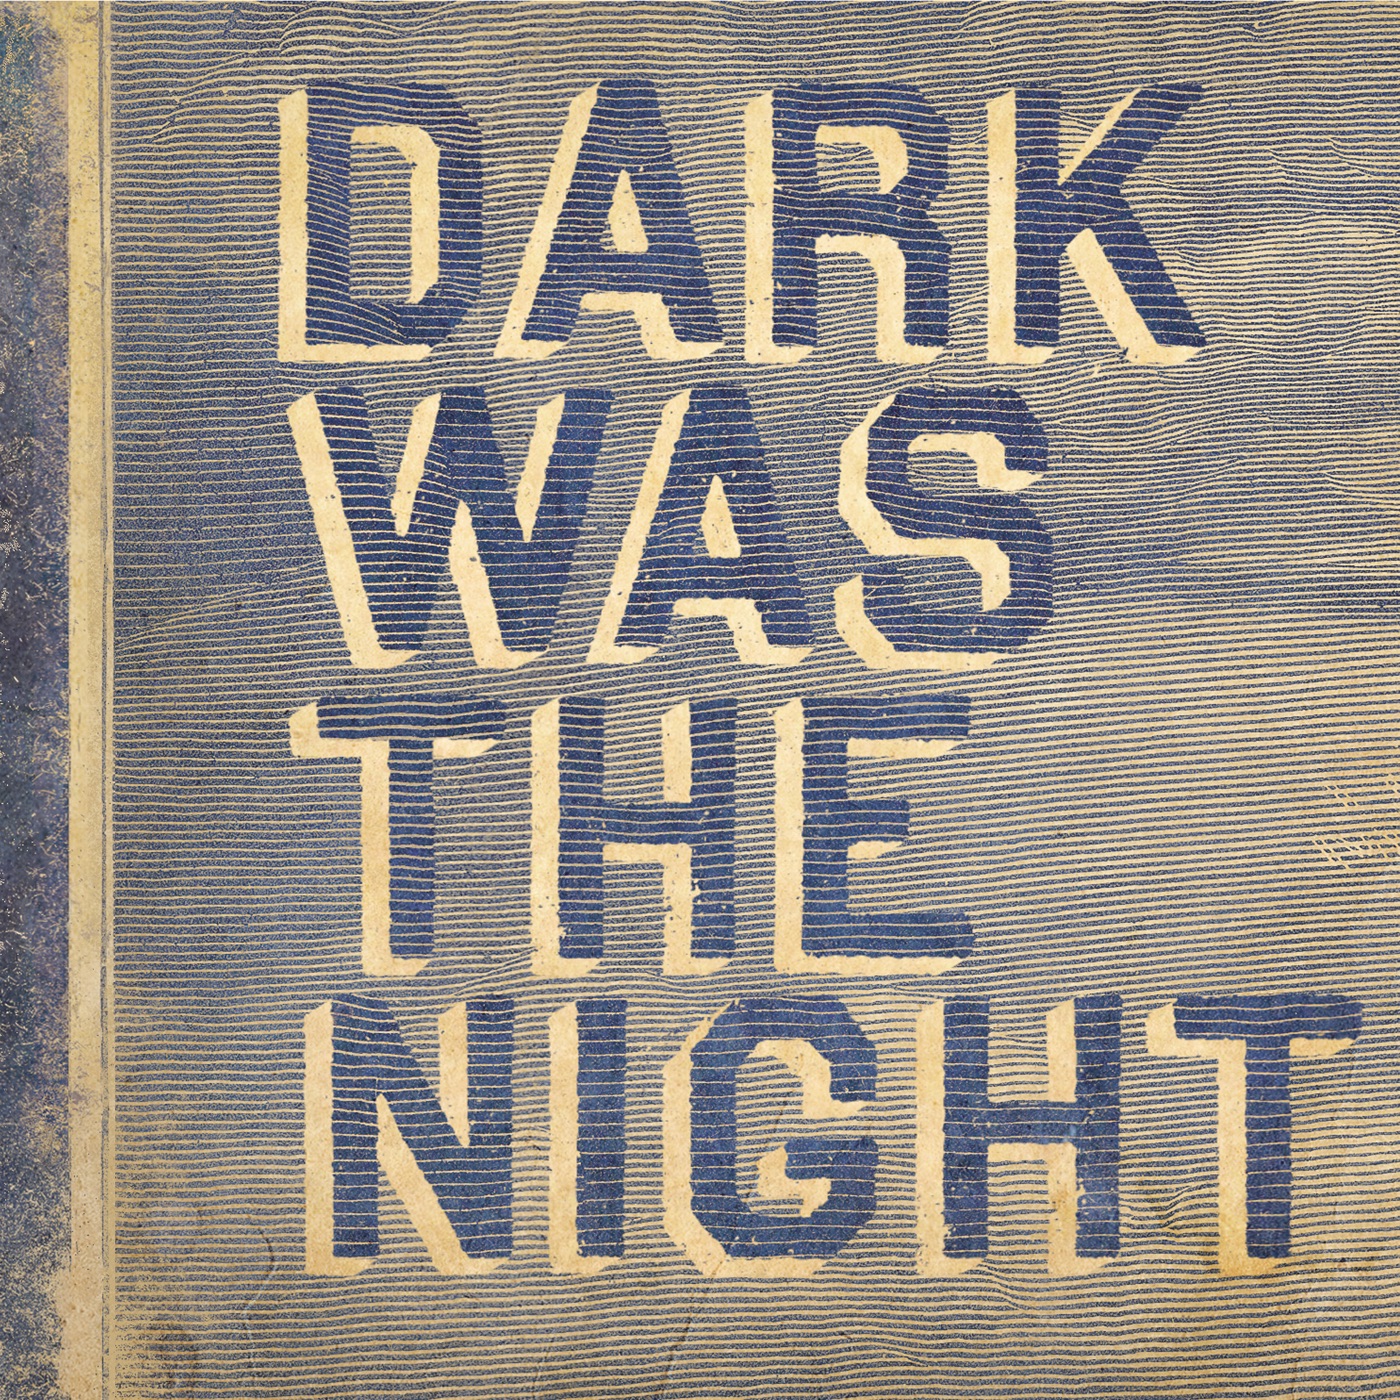 Dark Was the Night by Various Artists